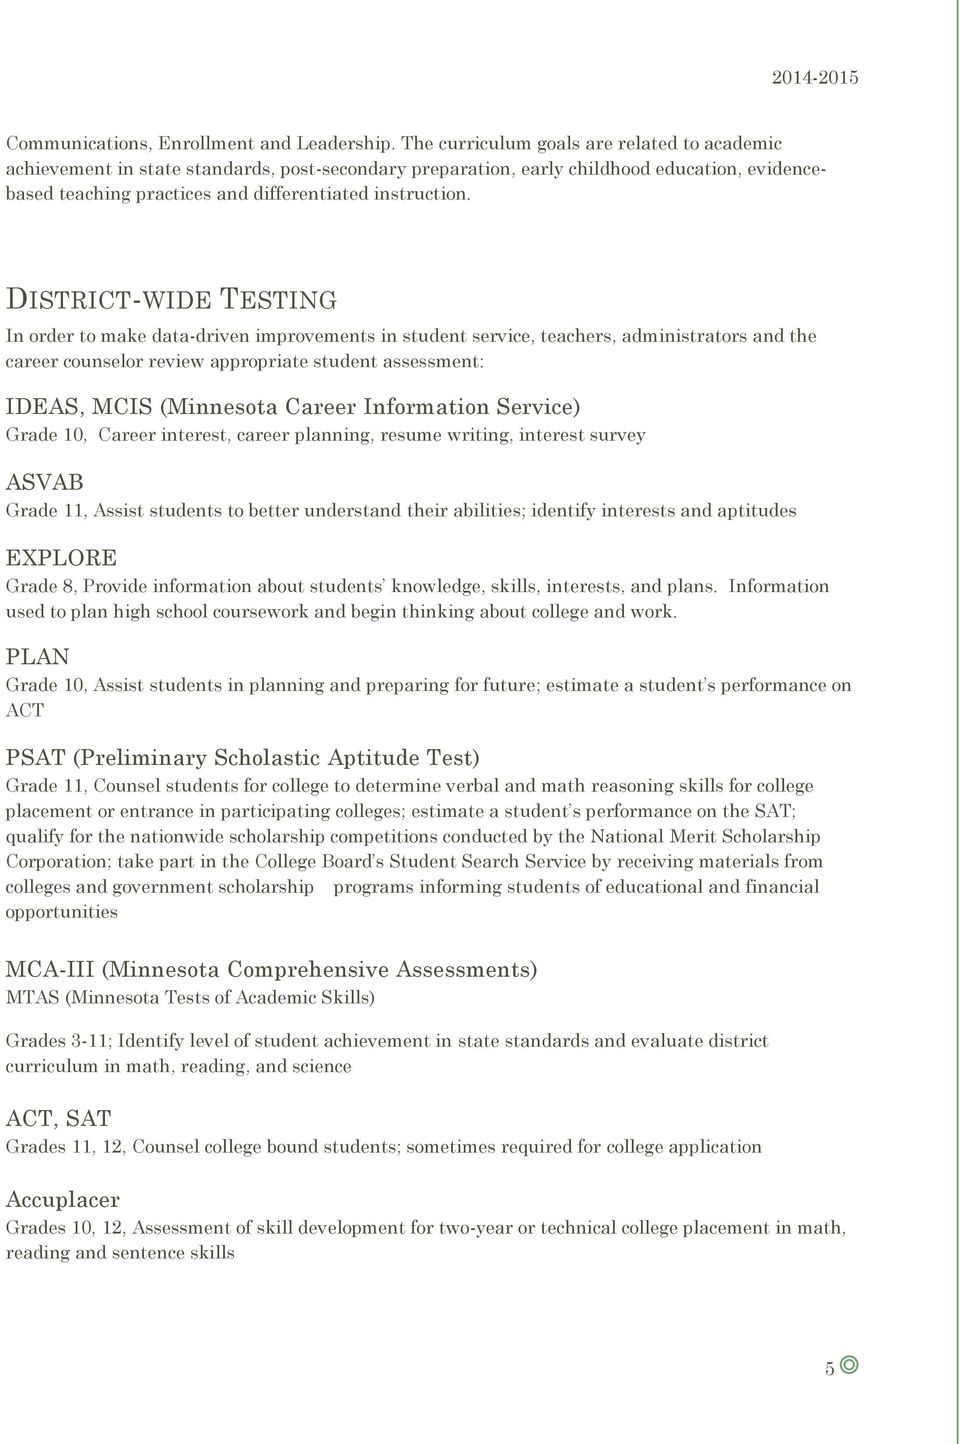 DISTRICT-WIDE TESTING In order to make data-driven improvements in student service, teachers, administrators and the career counselor review appropriate student assessment: IDEAS, MCIS (Minnesota